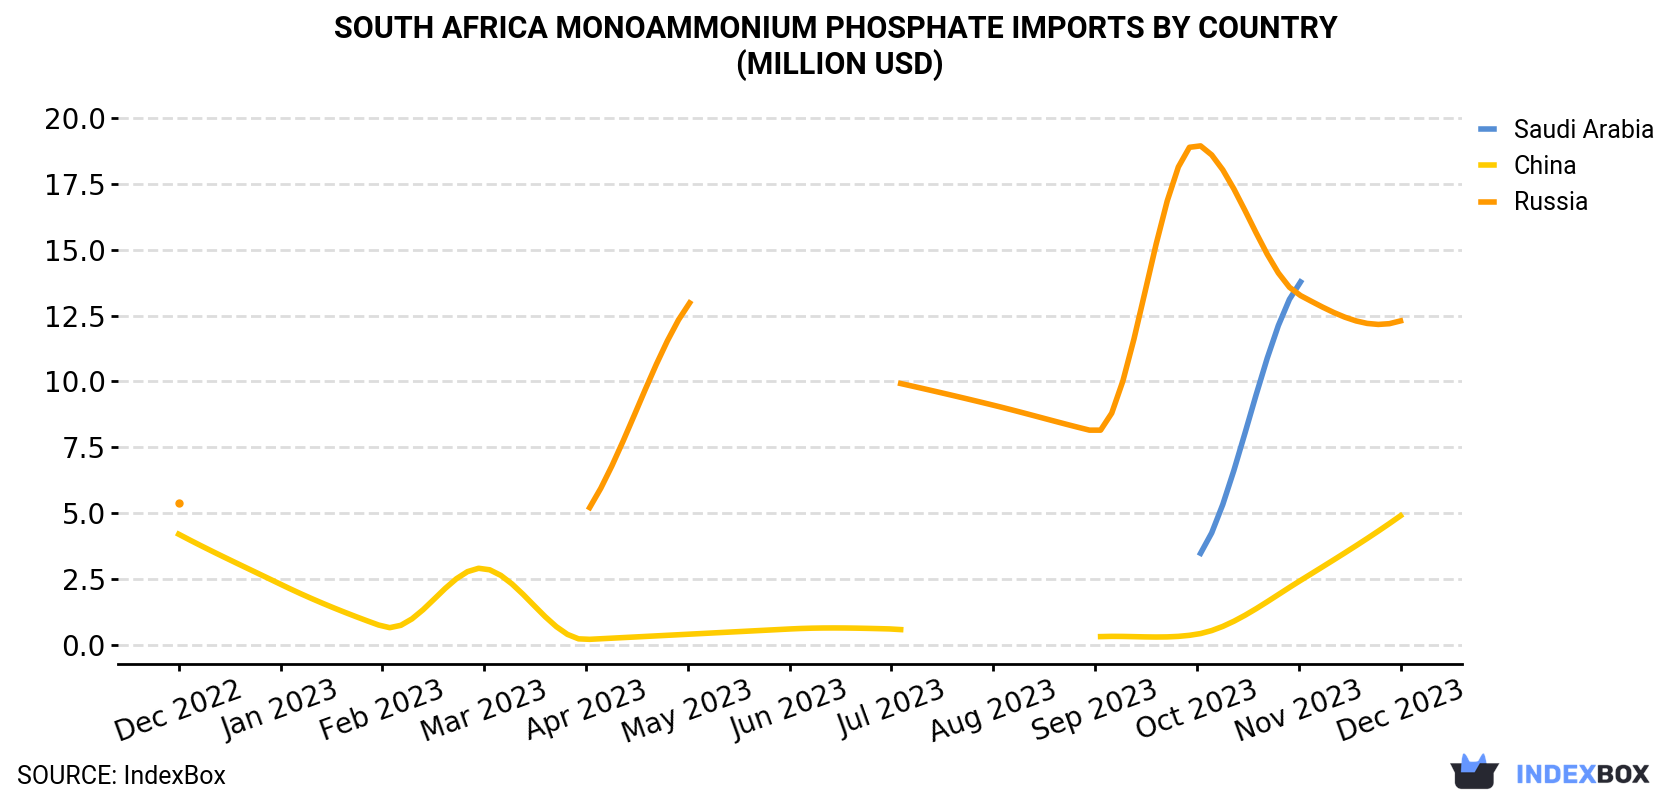 South Africa Monoammonium Phosphate Imports By Country (Million USD)